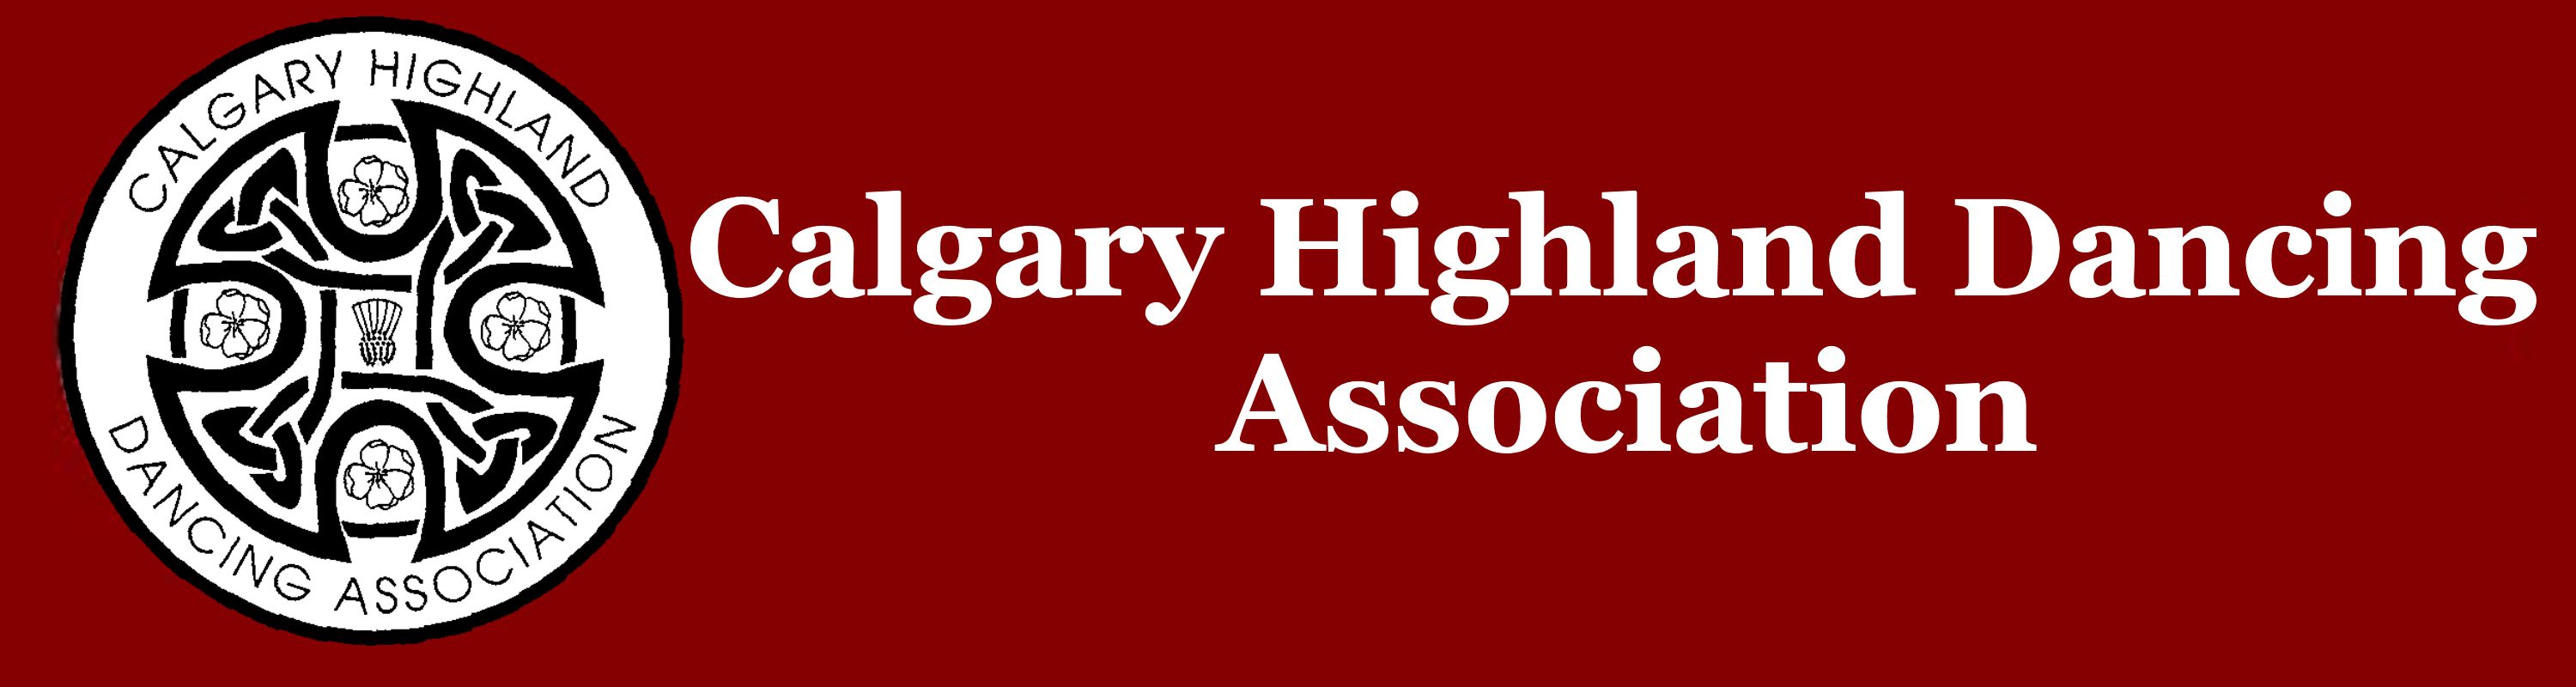 Non profit organization established to promote Highland Dancing in Calgary and surrounding areas.